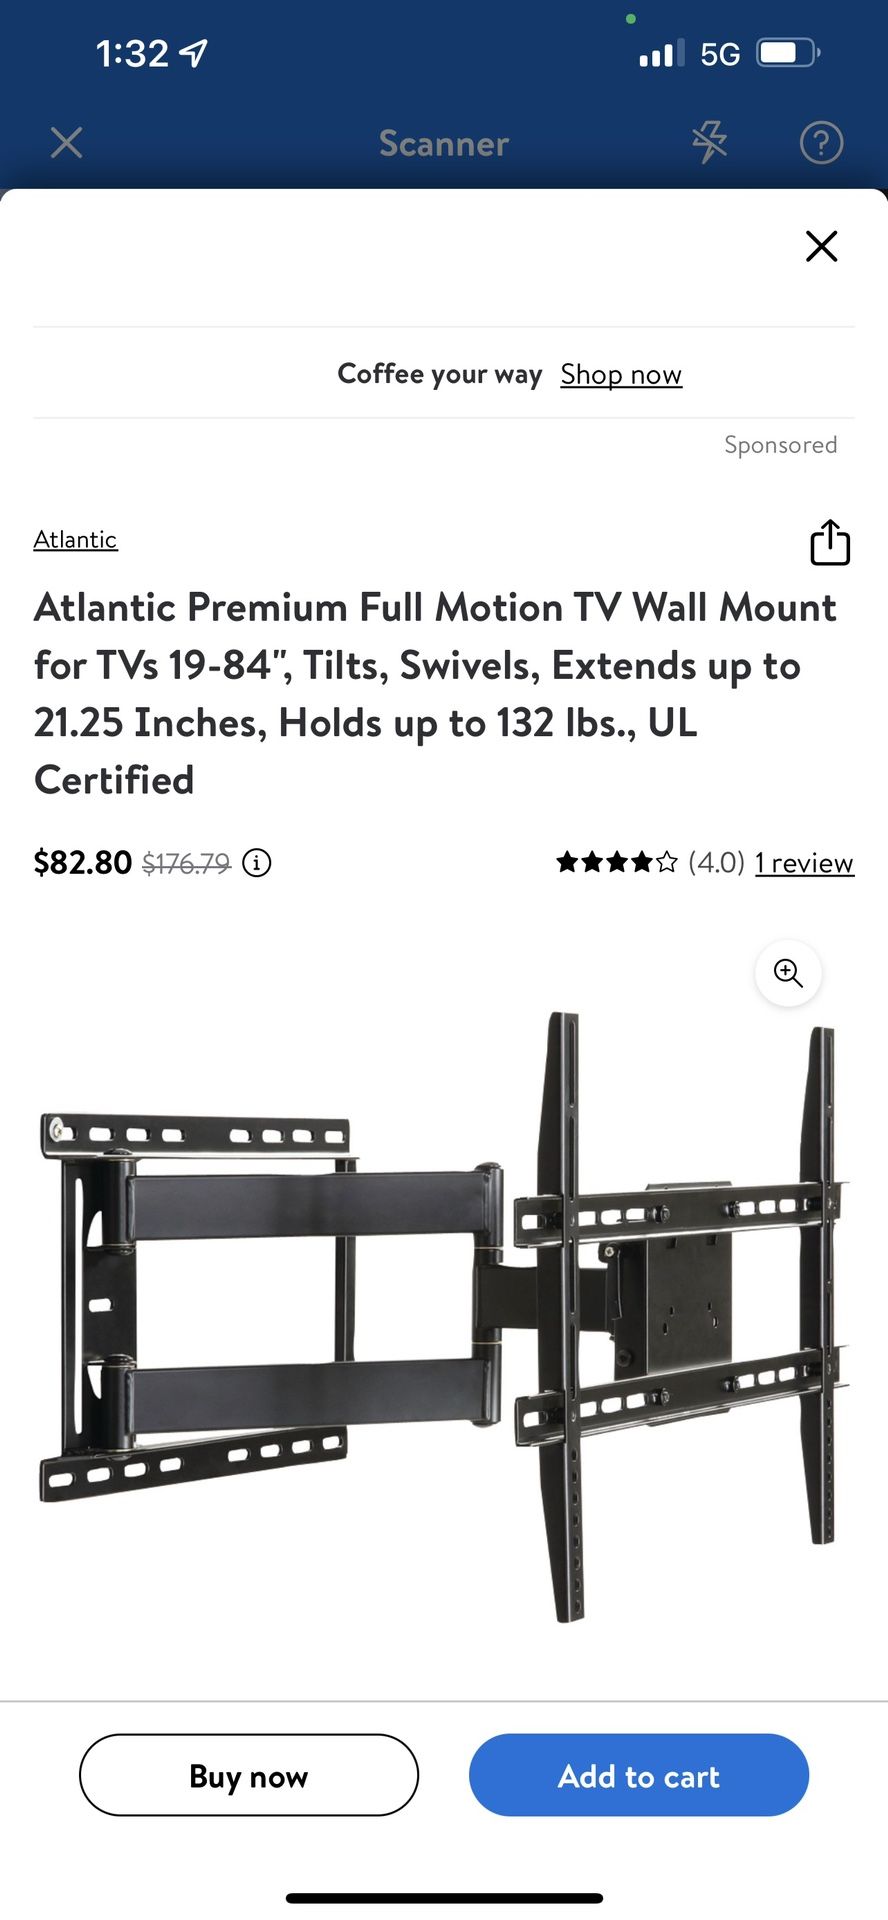 Atlantic Premium Full Motion TV Wall Mount for TVs 19-84", Tilts, Swivels, Extends up to 21.25 Inches, Holds up to 132 lbs., UL Certified 